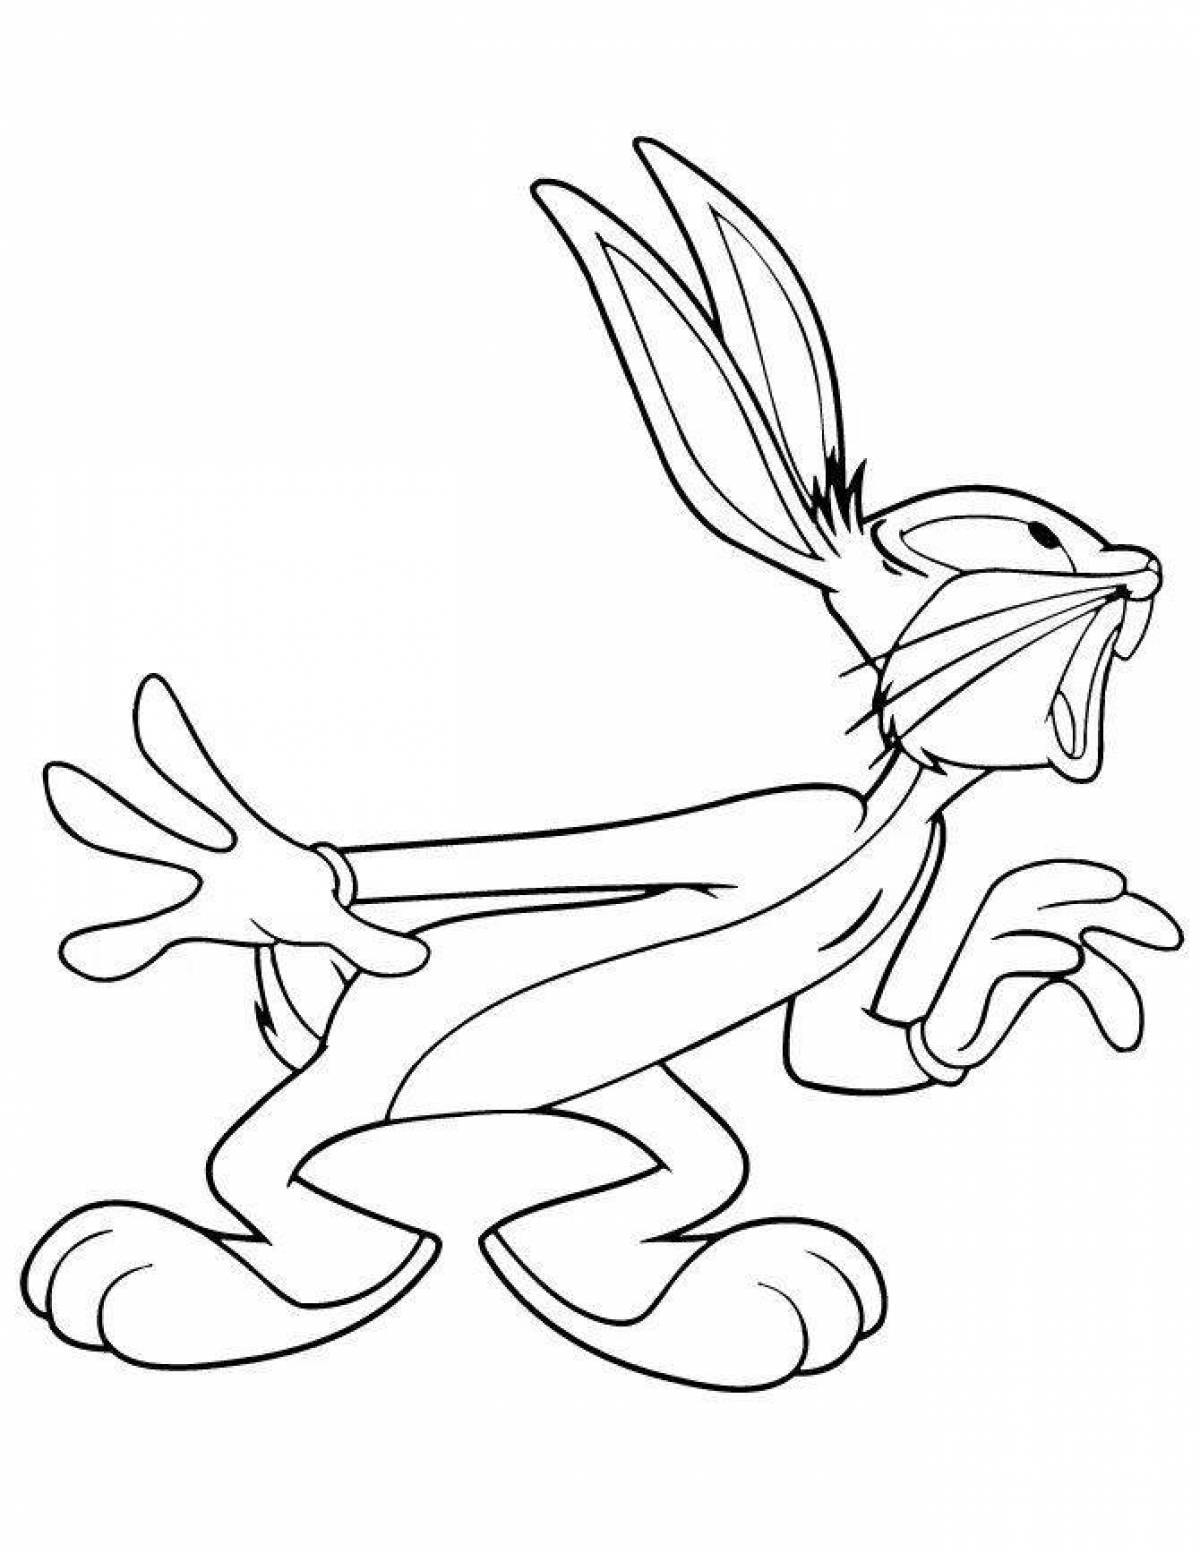 Outgoing bugs bunny coloring page